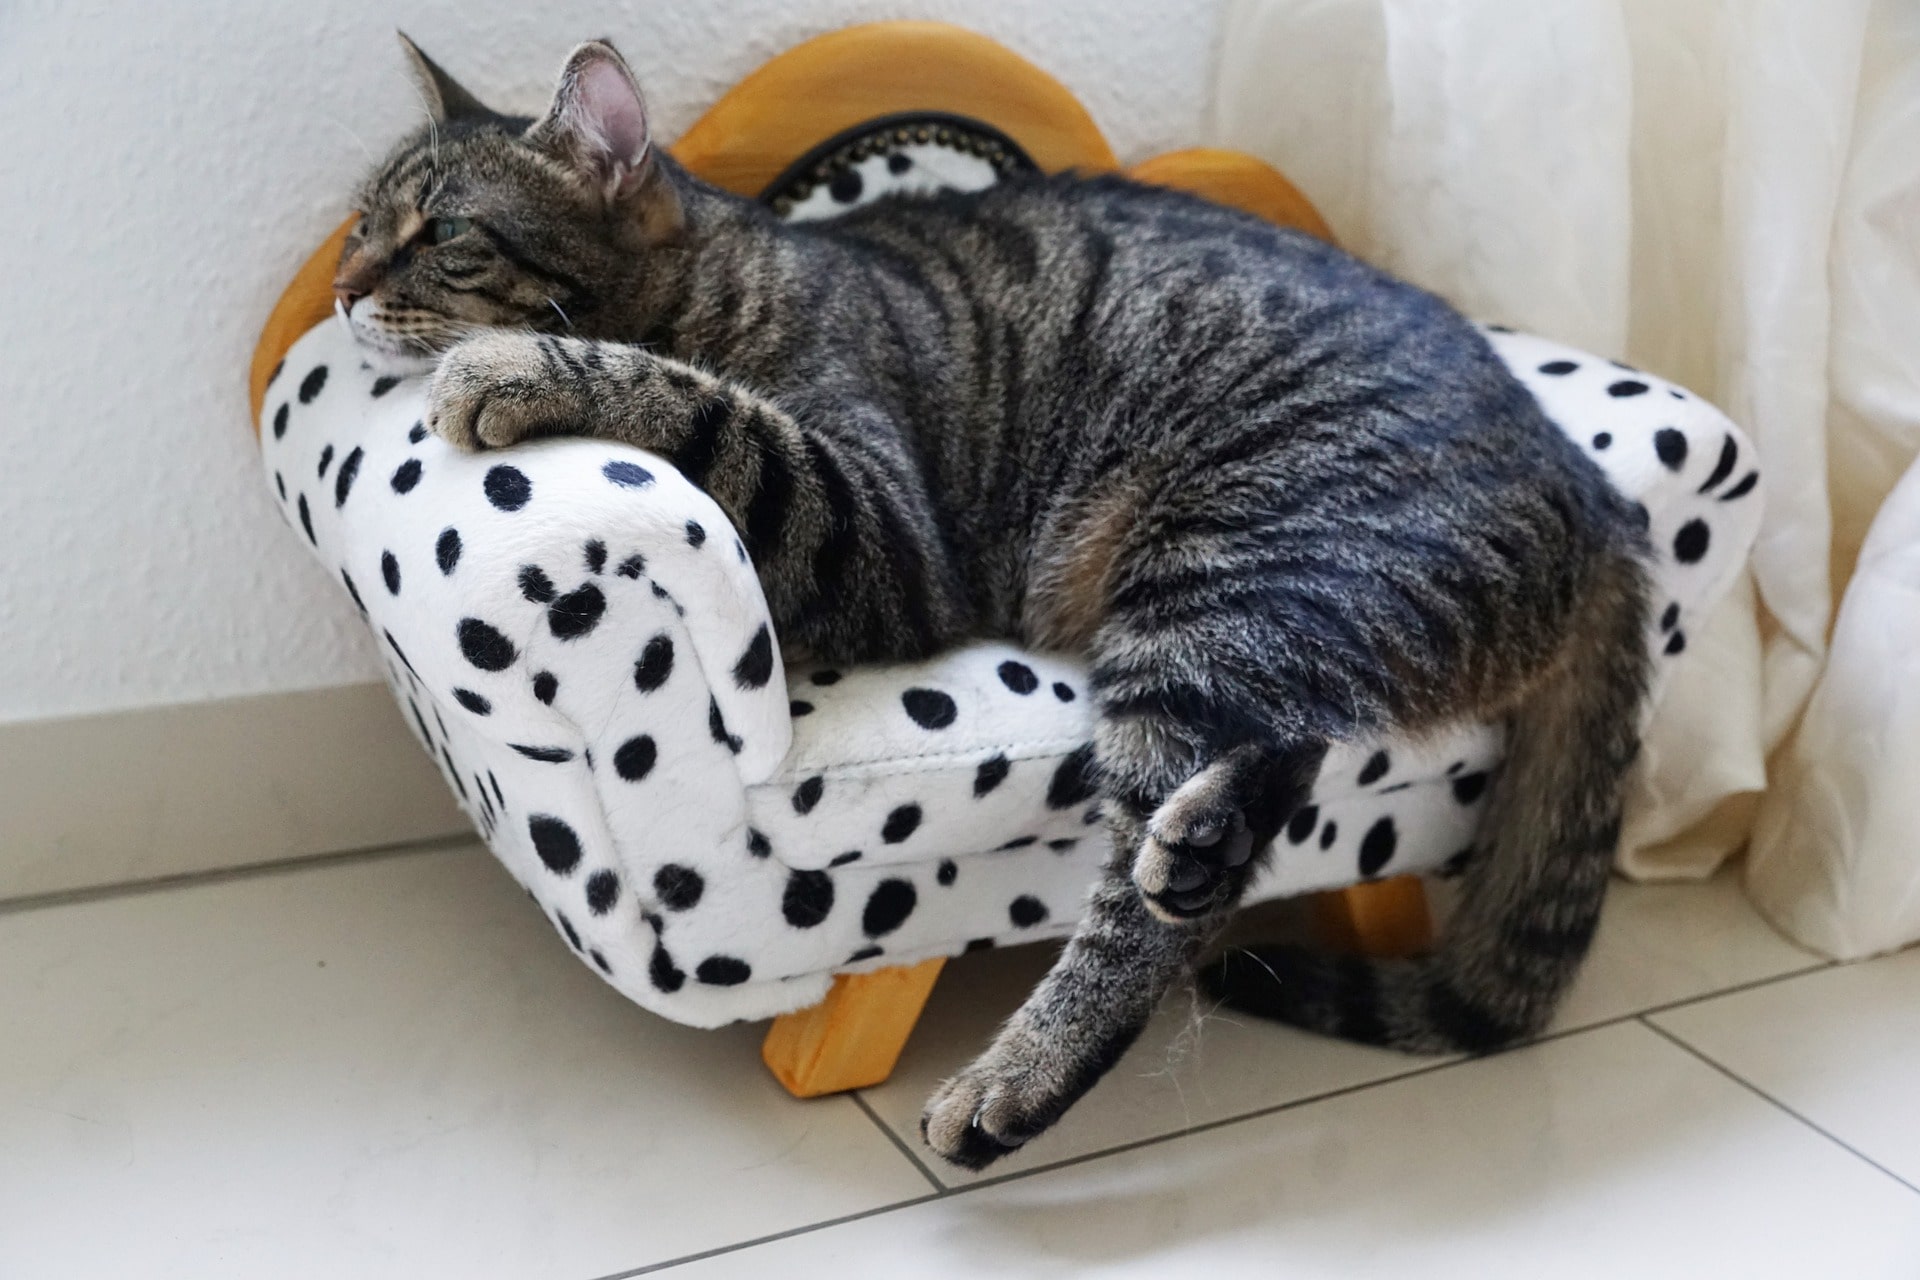 A cat laying down on a black and white print miniature sofa.